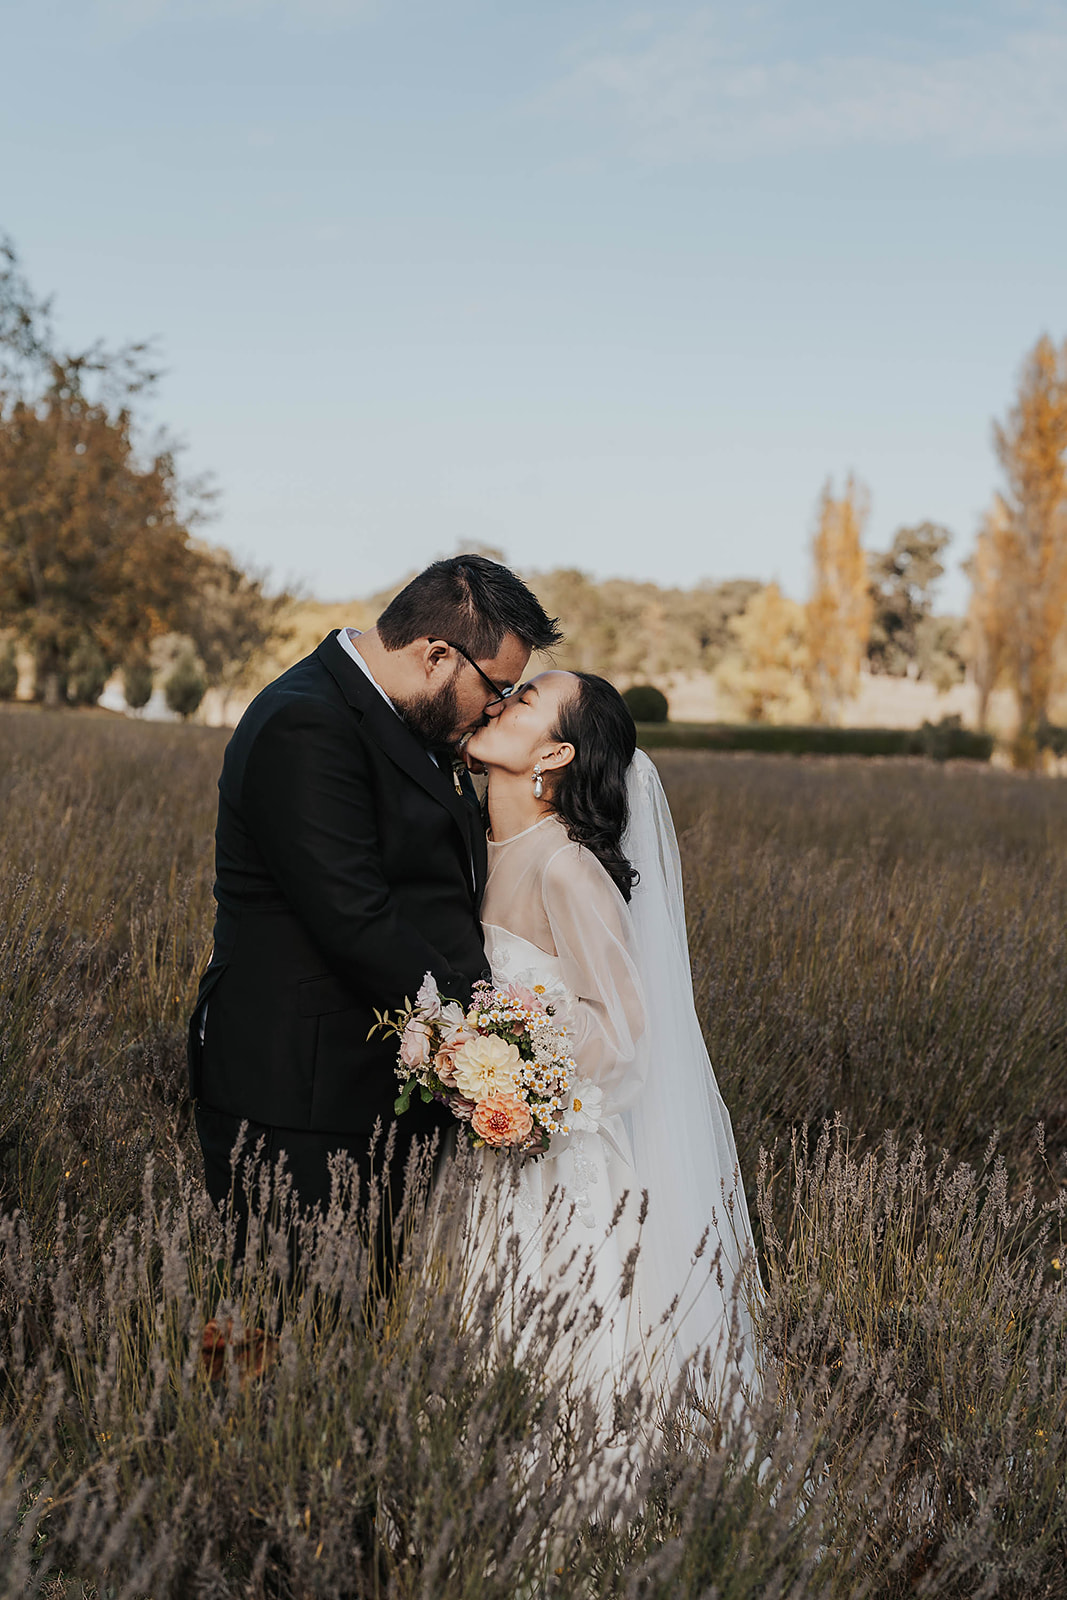 The bride and groom kiss in a lavender field at Sault, Daylesford.